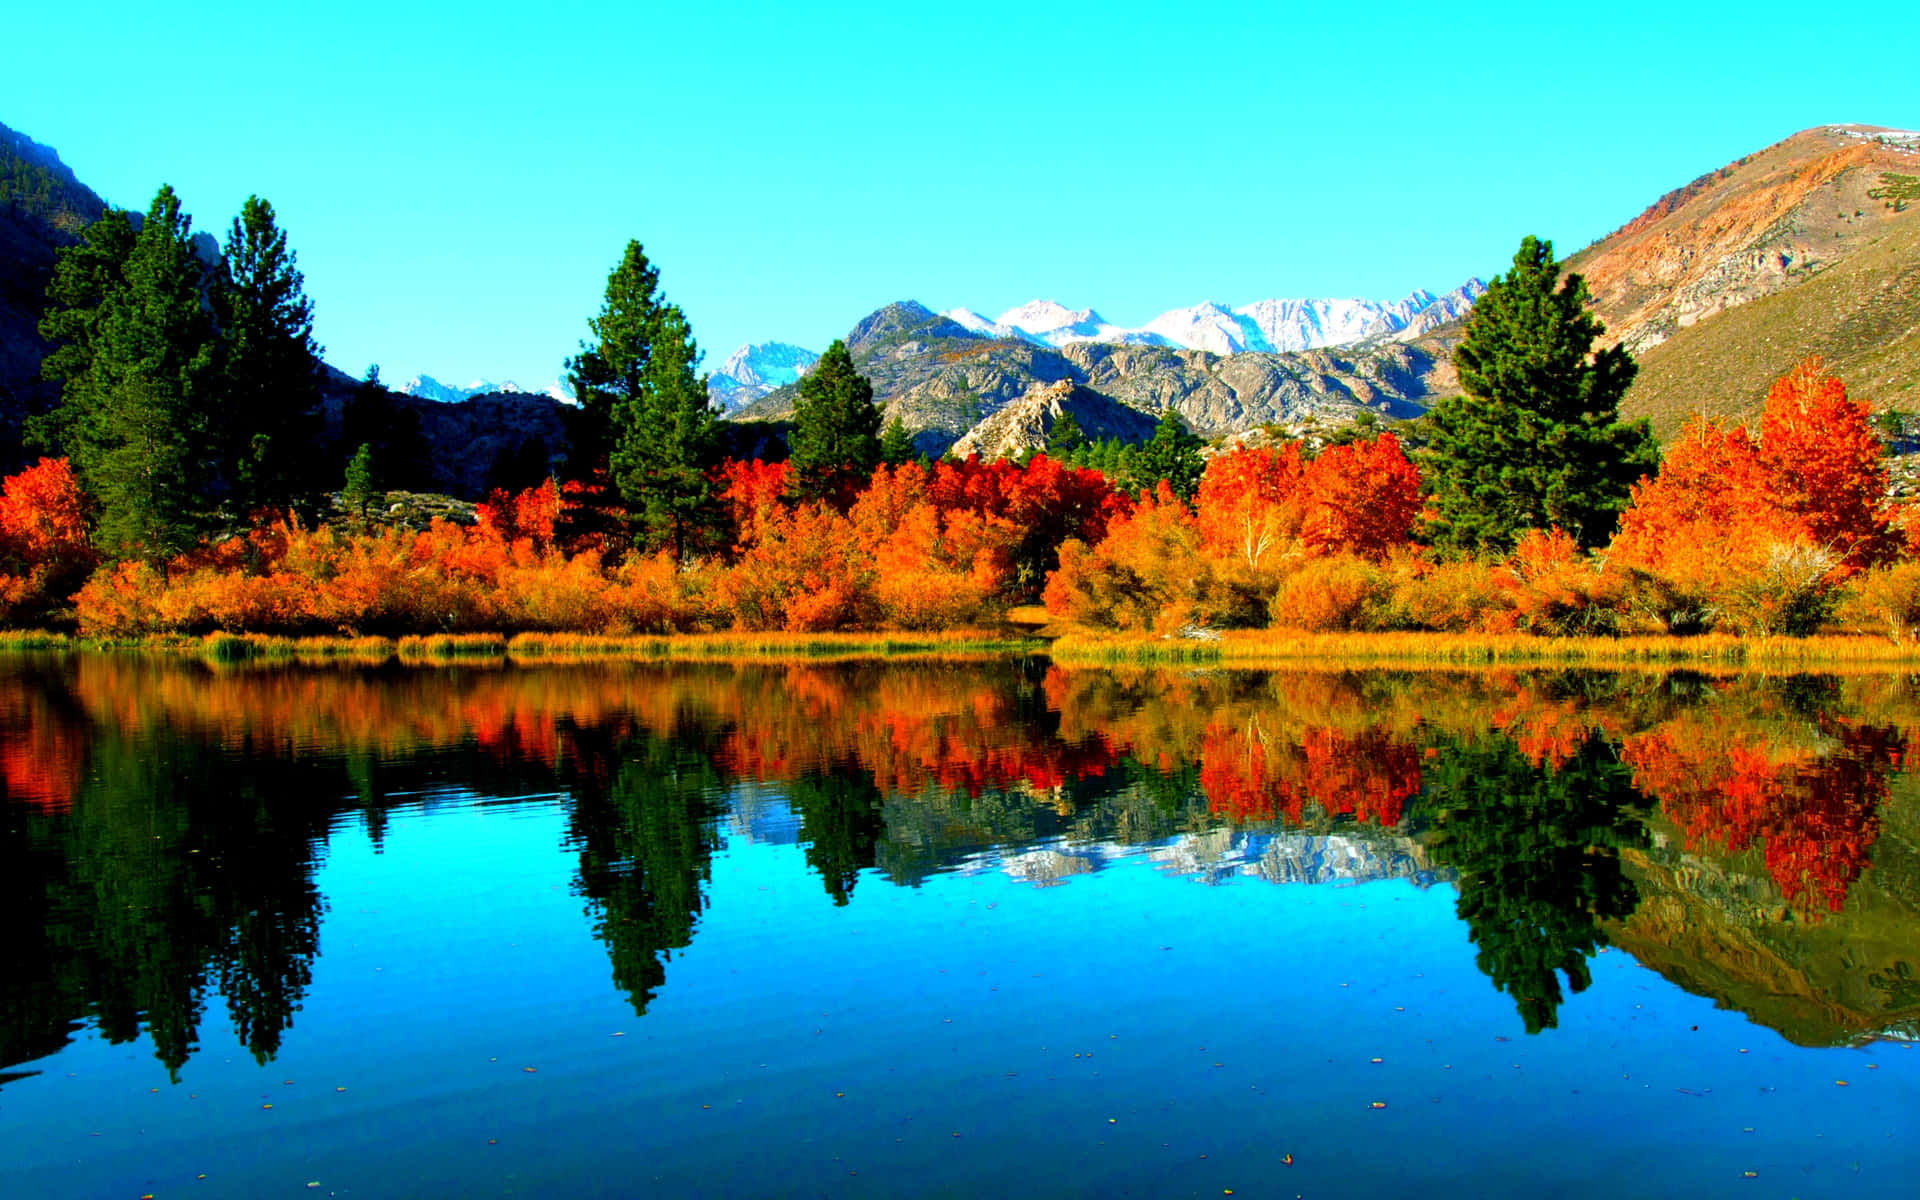 Download Tranquil Autumn Serenity At Fall Lake Wallpaper | Wallpapers.com